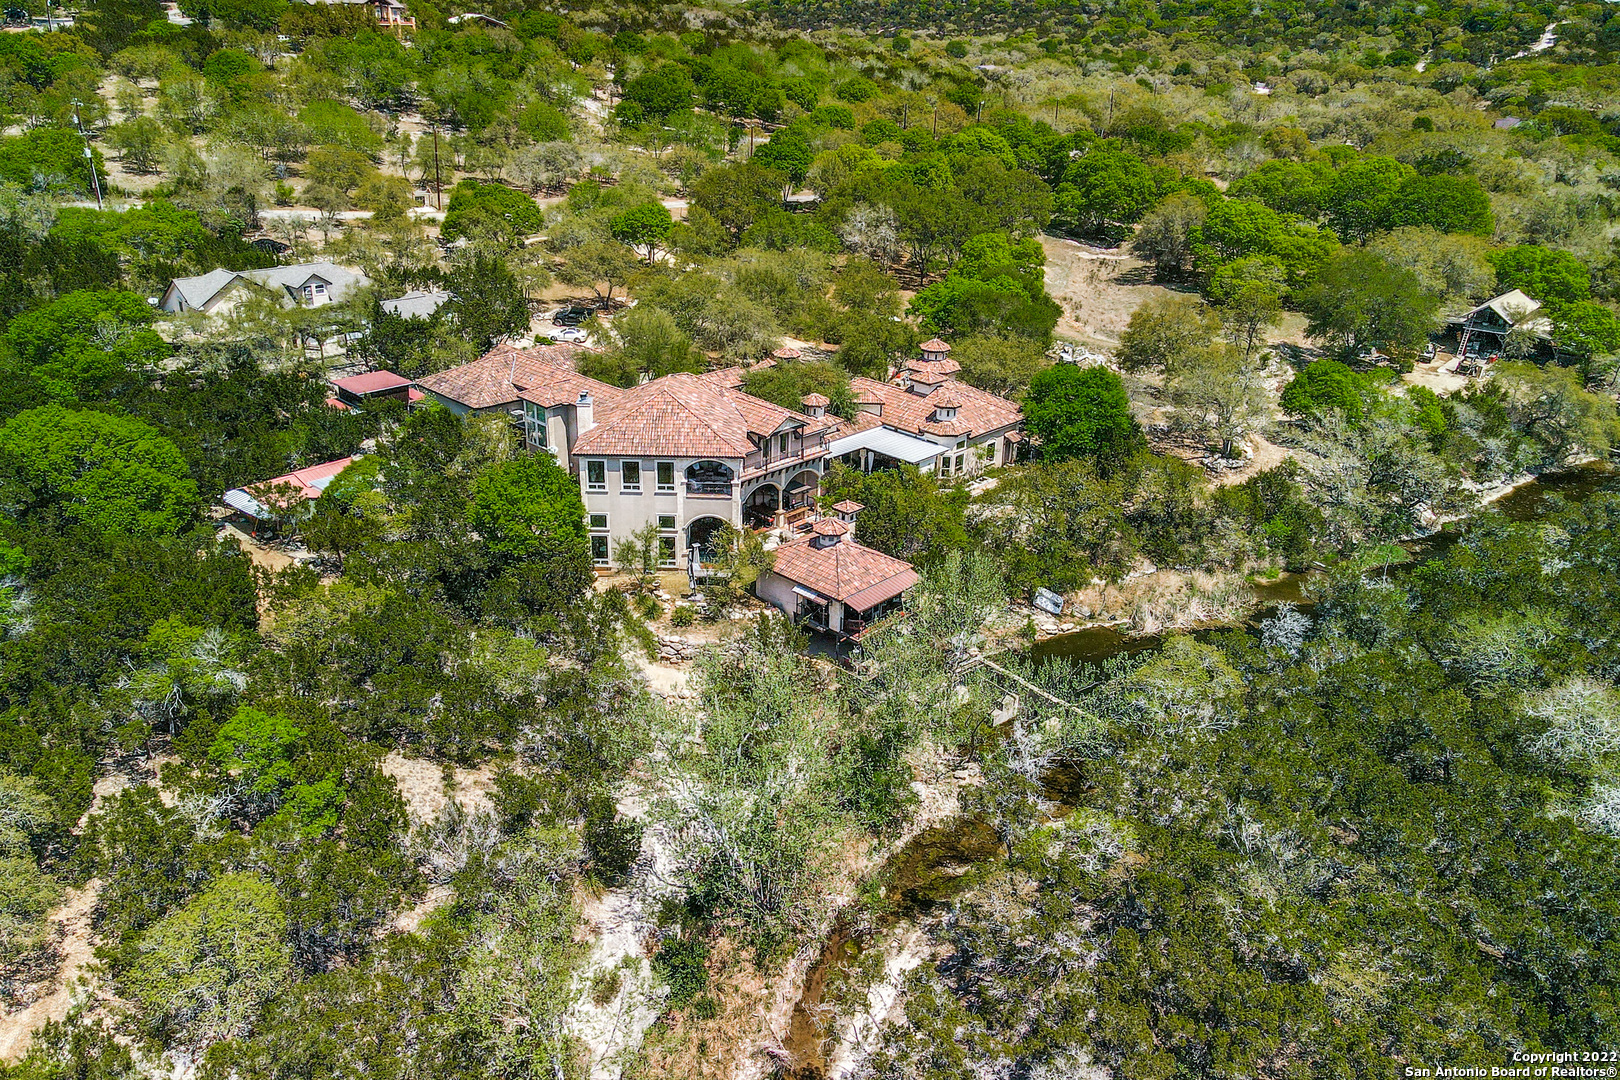 Own a Private Oasis in the Texas Hill Country situated along your very own spring fed, year-round creek! This Magnificent 2-story Mediterranean-style Estate sits on 10 acres of Hill Country in the Heart of Grey Forest with picturesque 360-degree views of the surrounding hills and total privacy in your backyard Hill Country paradise is only 30 min to the San Antonio International Airport and 2 hours to Austin. Enjoy the convenience of being close to 1604, I-10, and all of the shopping at The Rim & La Cantera. The open concept layout offers natural light showcasing a neutral color palette, crown molding, arched entryways, high level finishes such as alabaster, hand scraped wood and travertine floors, marble statues throughout and floor to ceiling stone fireplaces. Plenty of room for outdoor entertaining with large front & back patios, a cabana and two outdoor kitchens overlooking the water. The chef's kitchen is equipped with custom maple wood cabinetry, quartz countertops, a spacious walk-in pantry along with a Butler's pantry. The main-level master suite features tray ceilings with a sitting area overlooking the creek and private patio access. You are greeted by a grandiose statue in the master bathroom and the spaciousness of a dual vanity, an oversized marble garden tub with a fireplace and a beautiful curved walk-in shower. Upstairs, each bedroom has its own private balcony overlooking the creek and a media room perfect for game night or your own private theater. The Main House also featured a 4-car garage with separate stairway to the second floor.  In addition to the Main House, you will enjoy 2 separate Guest Homes on the property as well as an Equipment Barn and three-level deck overlooking the creek and dam. Owner financing available! New asphalt has been added to driveway!